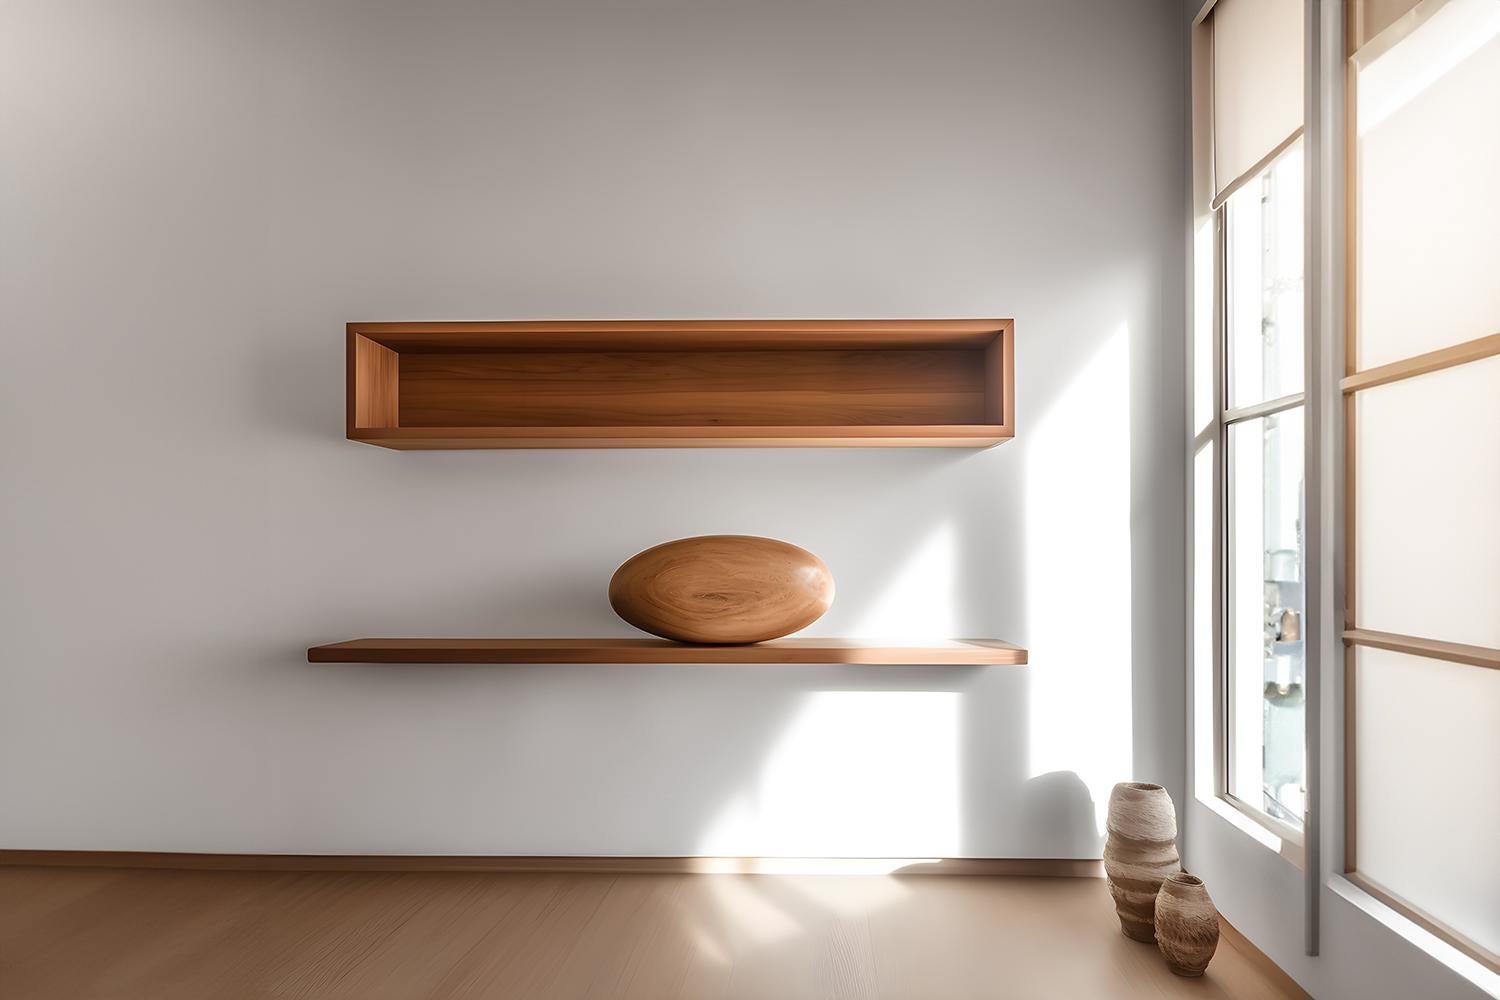 Large Rectangular Floating Shelf with Close Back and One Large Sculptural Wooden Pebble Accent, Sereno by Joel Escalona

—

What happens when the practical becomes art?
What happens when ornamentation gains significance?

Those were the questions